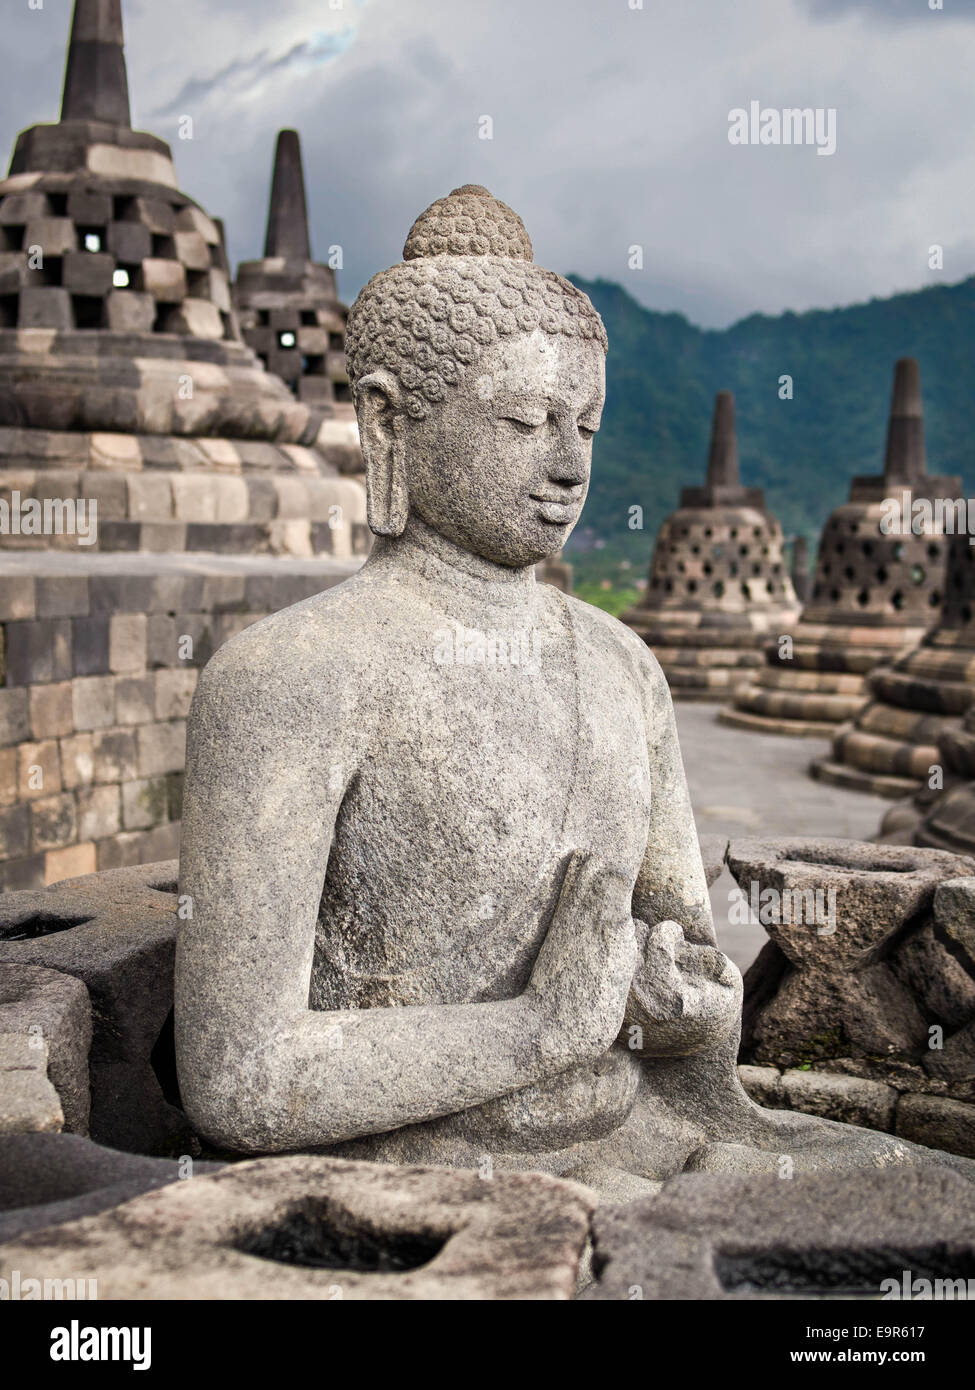 An ancient Buddha statue surrounded by stupas at Borobudur, the world's largest Buddhist monument, Java, Indonesia. Stock Photo